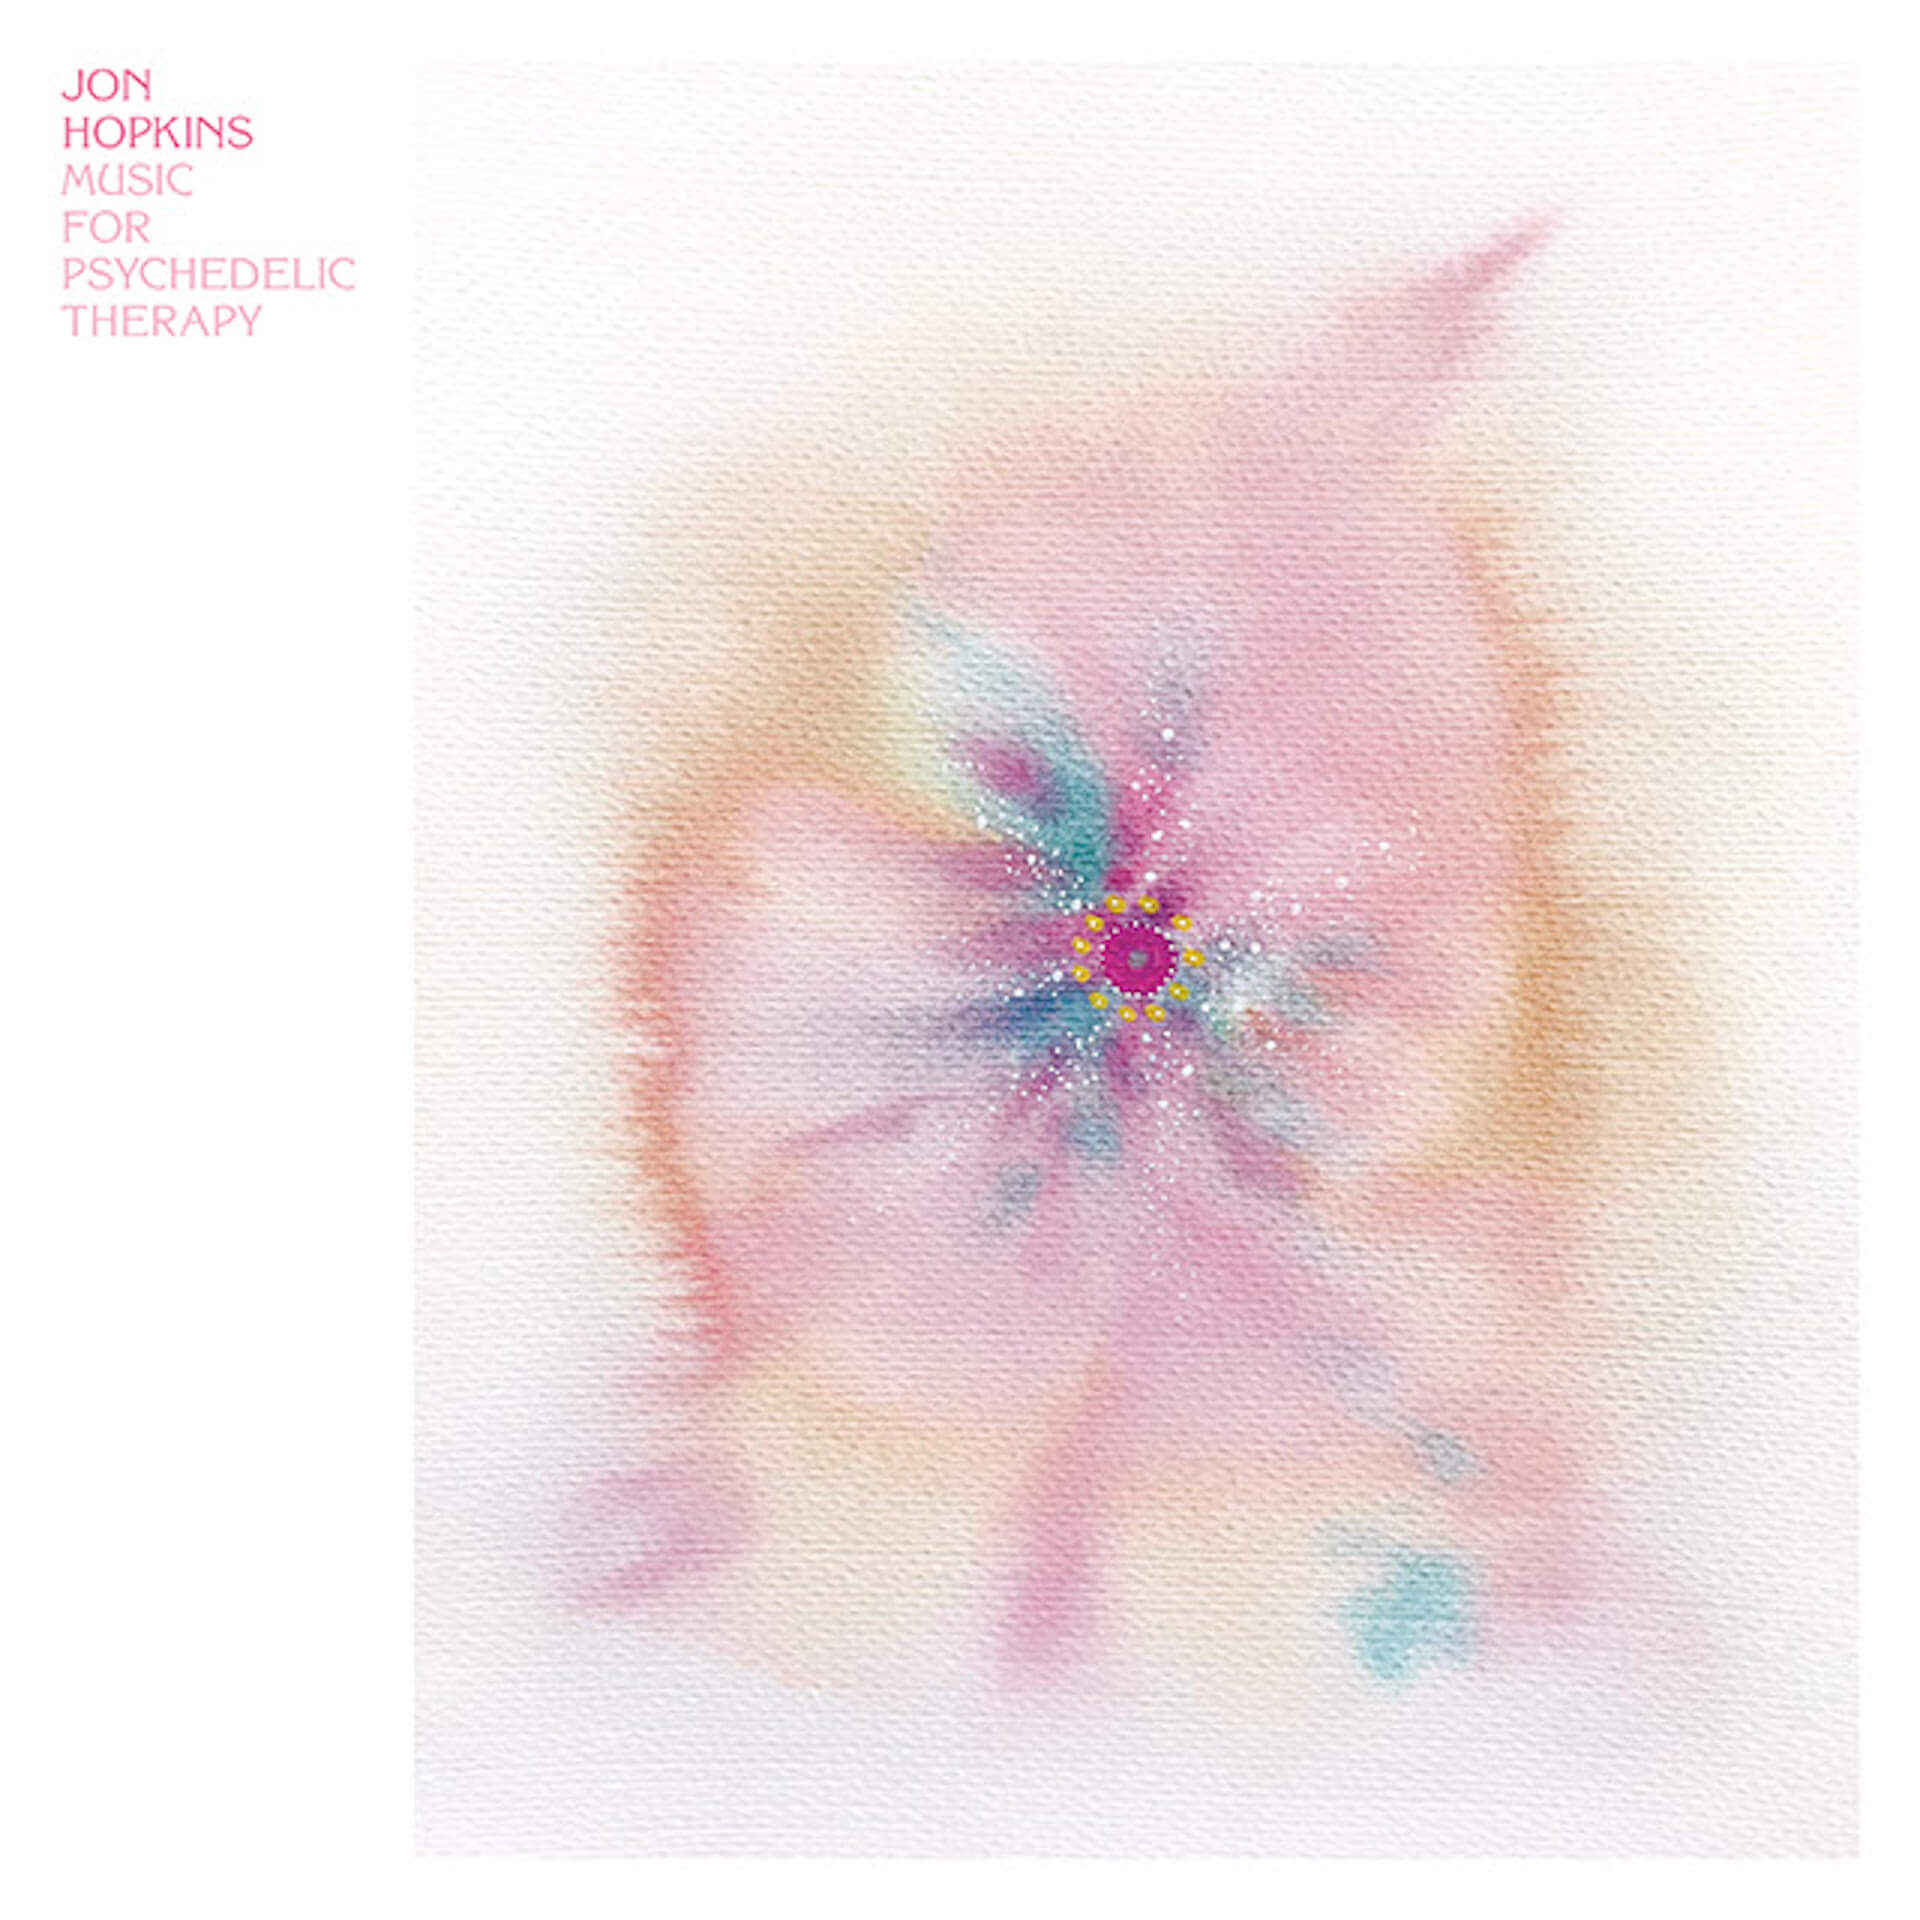 Jon Hopkinsが最新アルバム『Music For Psychedelic Therapy』を発表！収録曲“Sit Around The Fire”のMVも公開 music210903_jon_hopkins_2